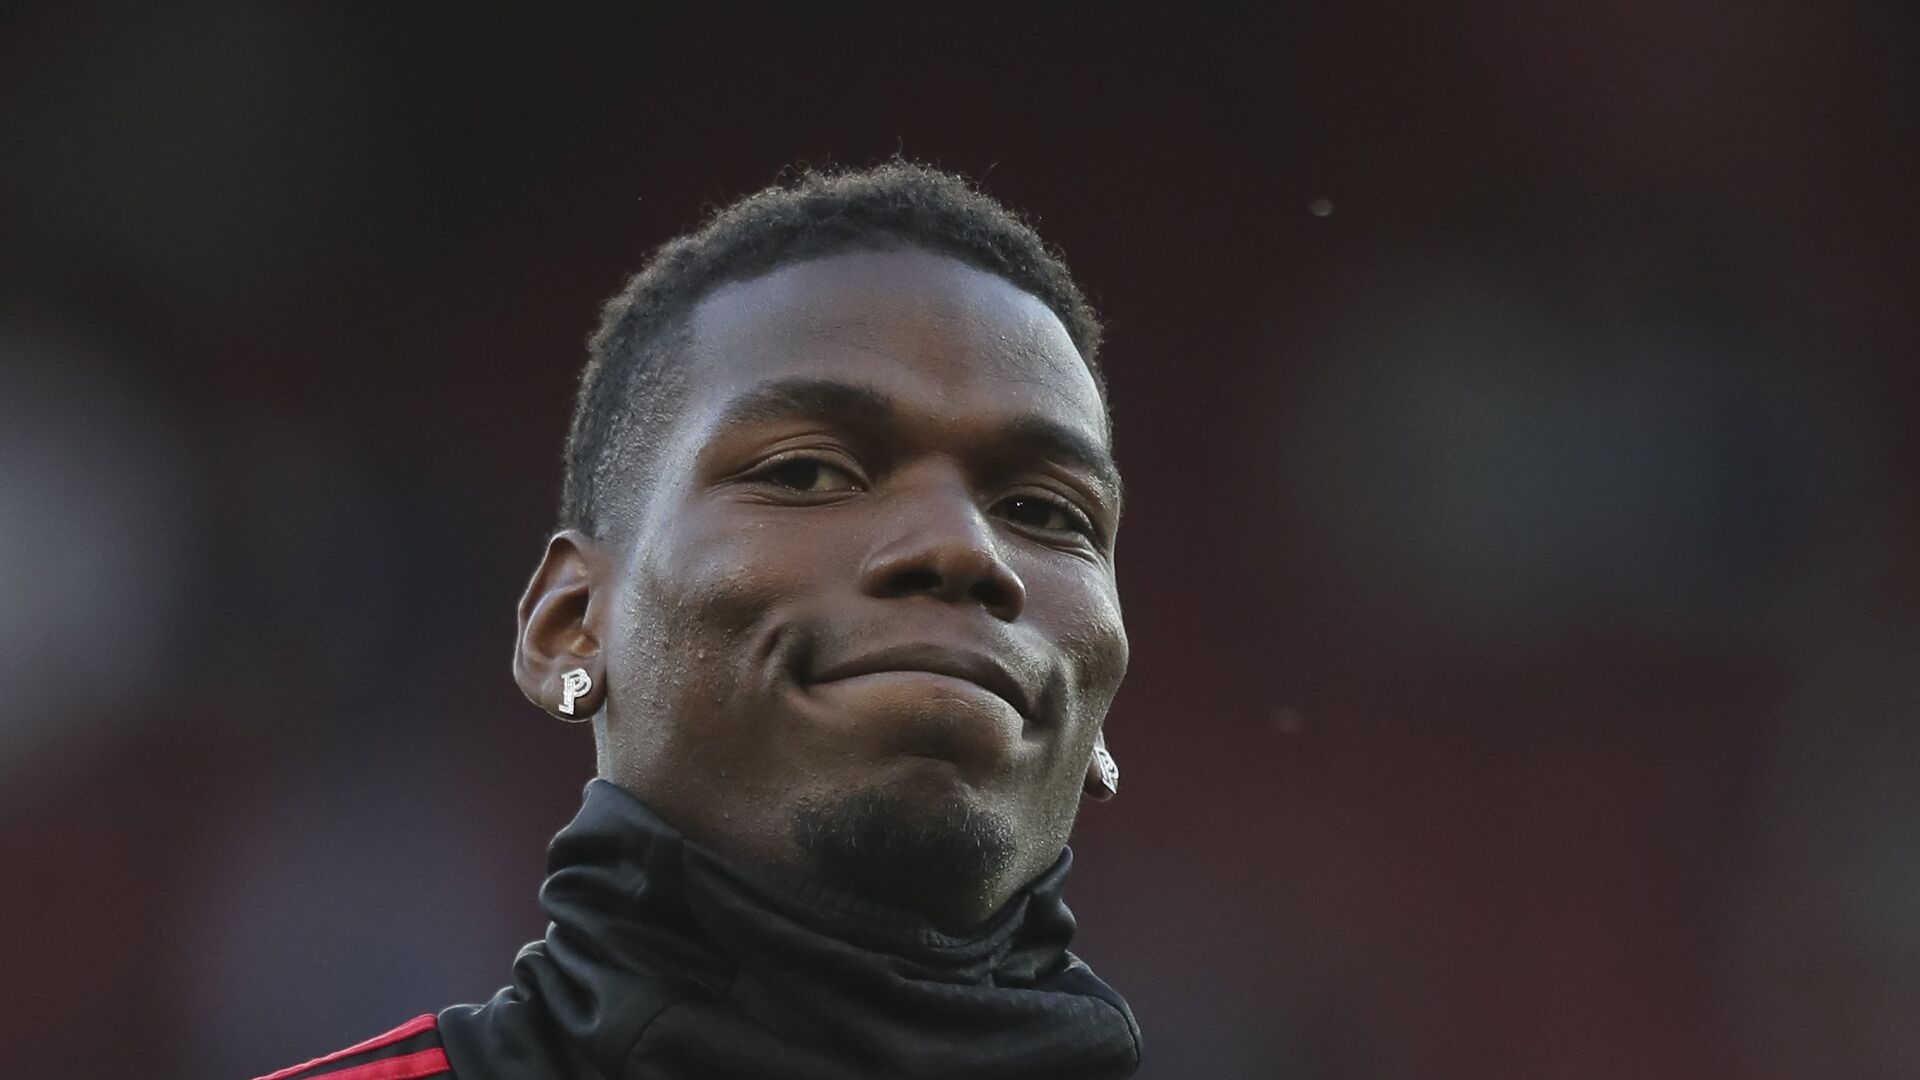 Manchester United's Paul Pogba applauds the fans as he takes part in the warm up prior to the start of the English Premier League soccer match between Manchester United and Leicester City at Old Trafford, in Manchester, England, Friday, Aug. 10, 2018 - اسپوتنیک افغانستان  , 1920, 24.07.2022